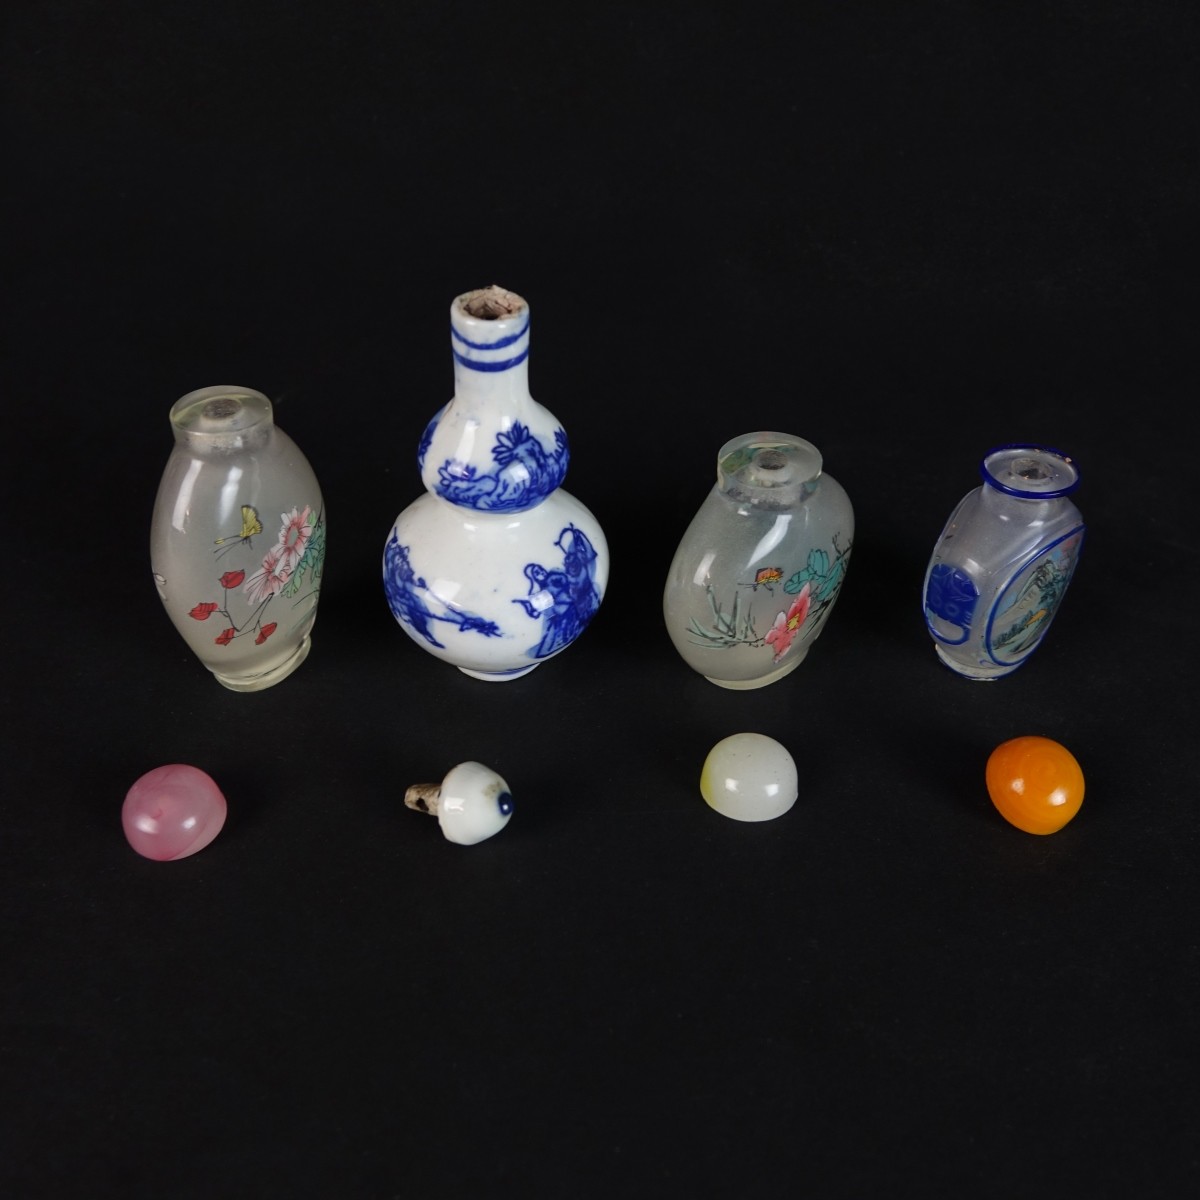 Four (4) Chinese Snuff Bottles